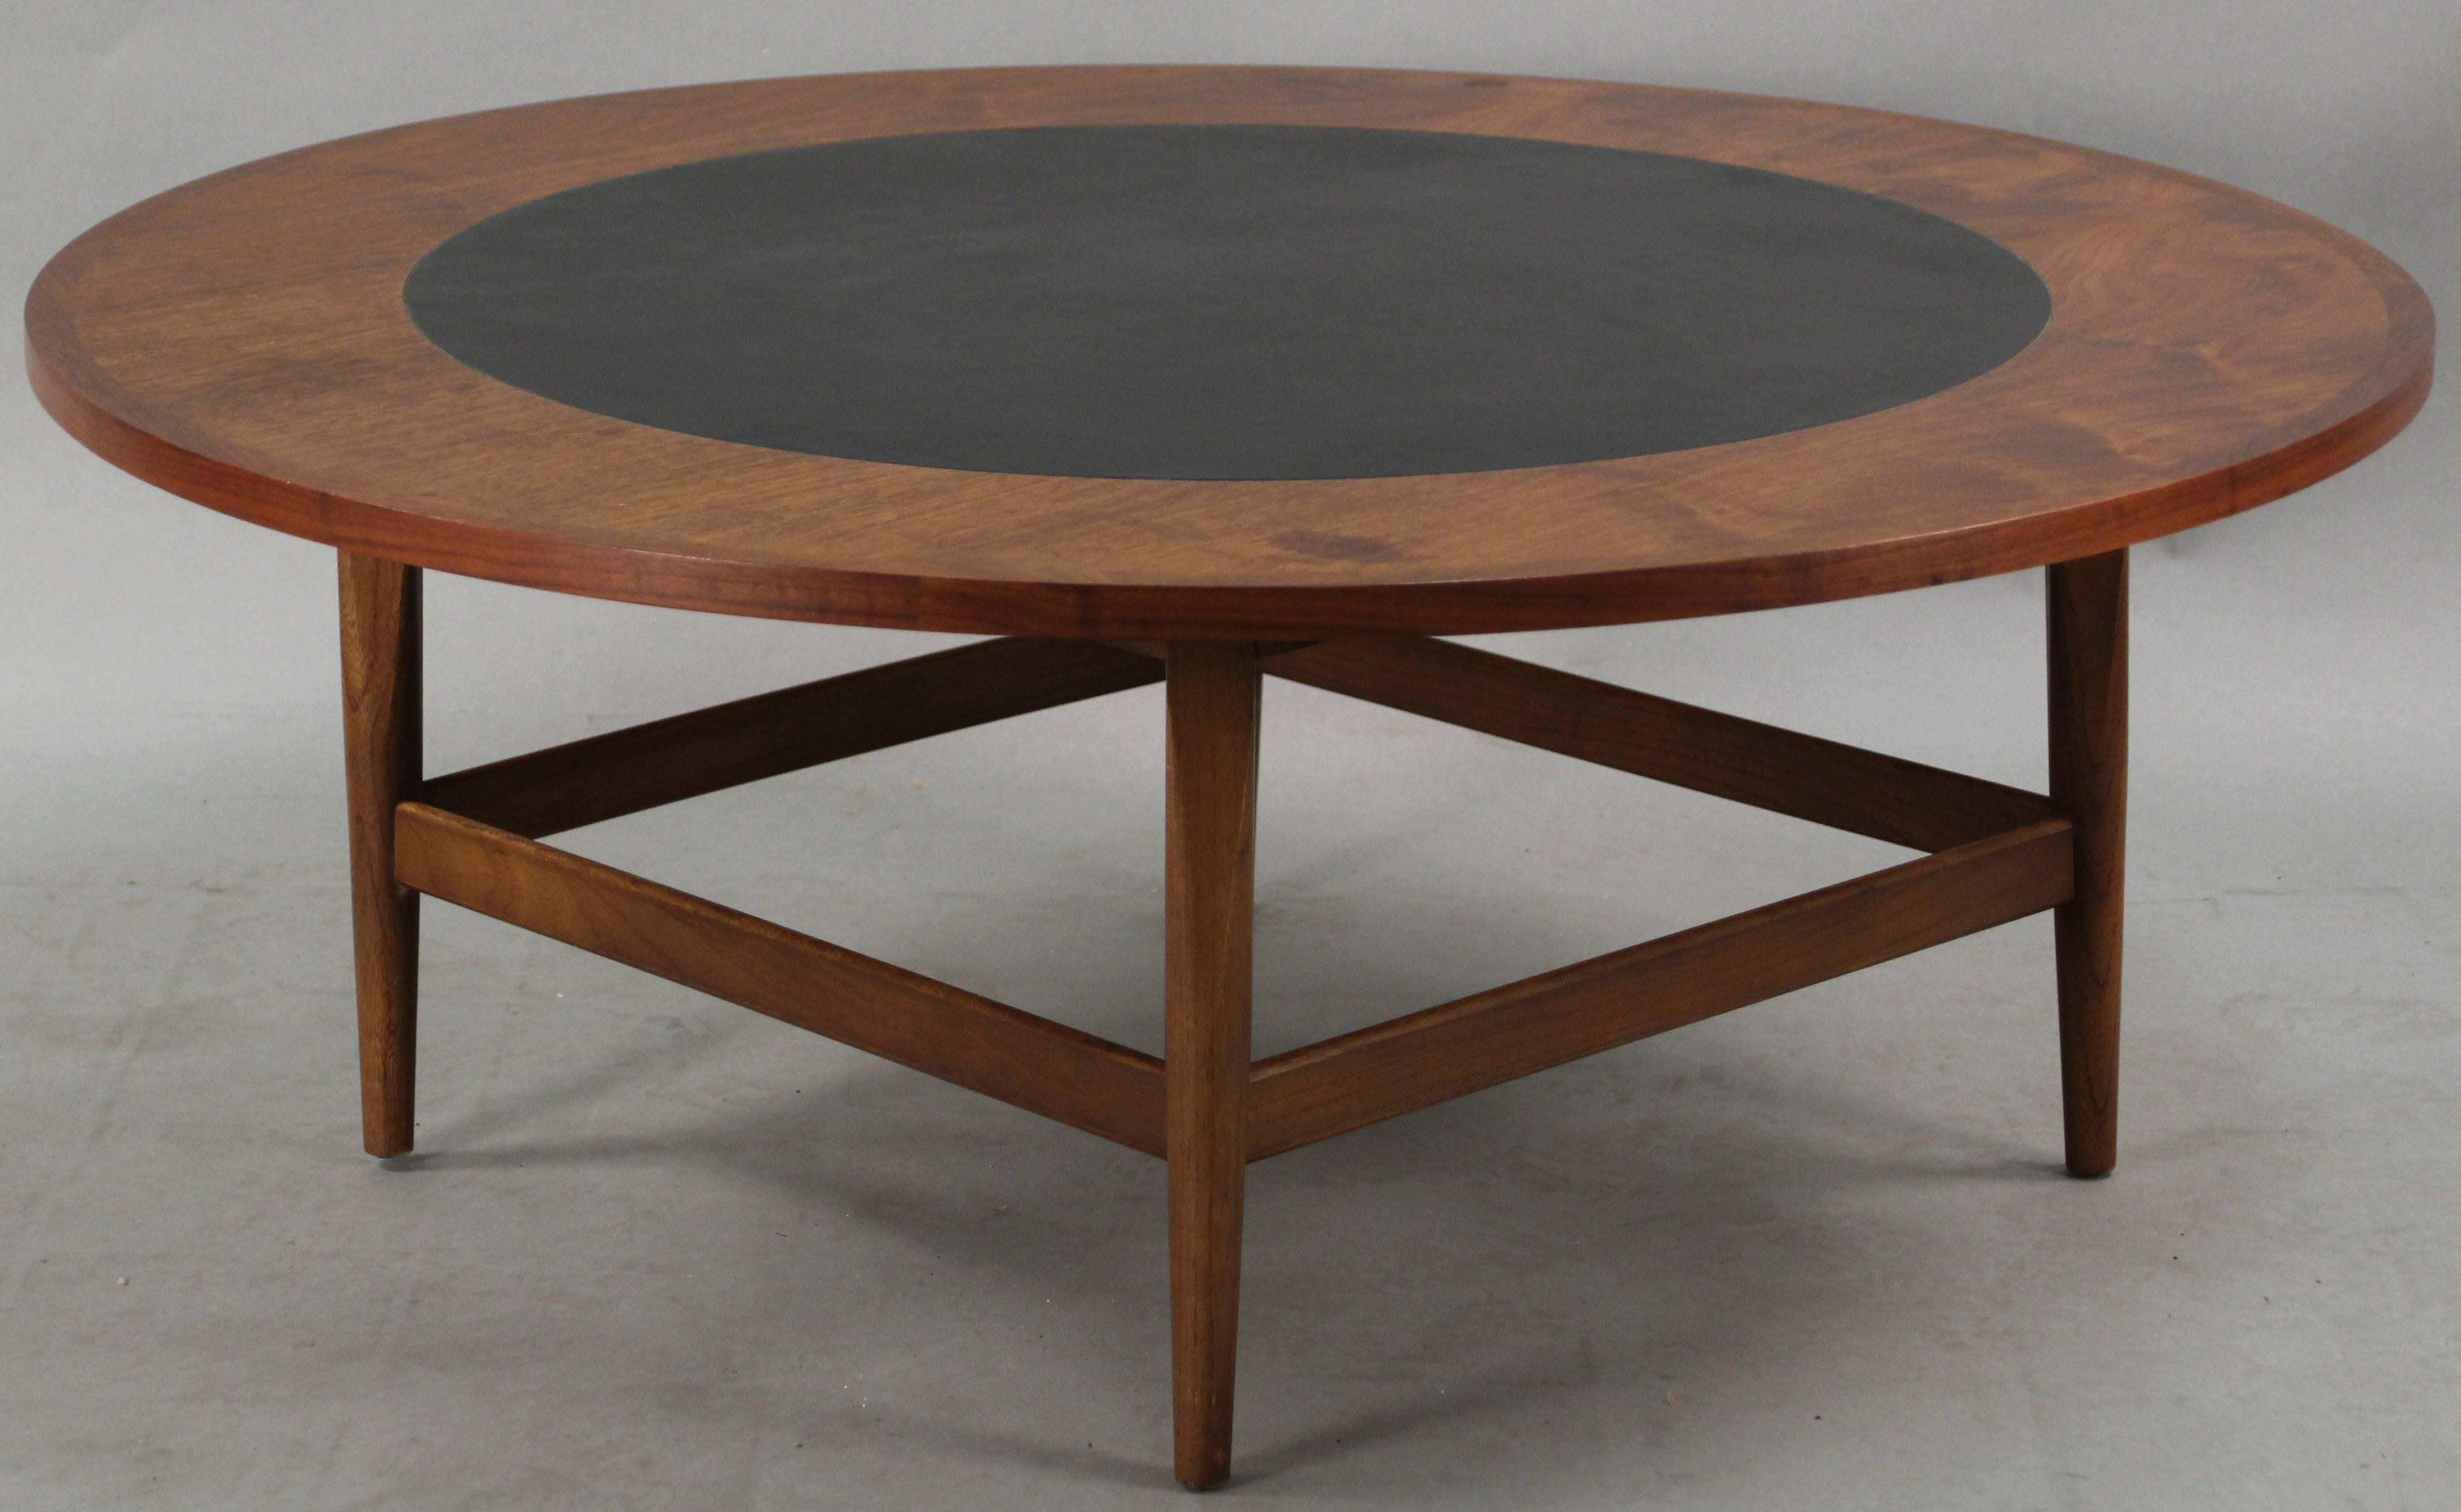 Wonderful round coffee table with clean, simple lines. Made by Lane.